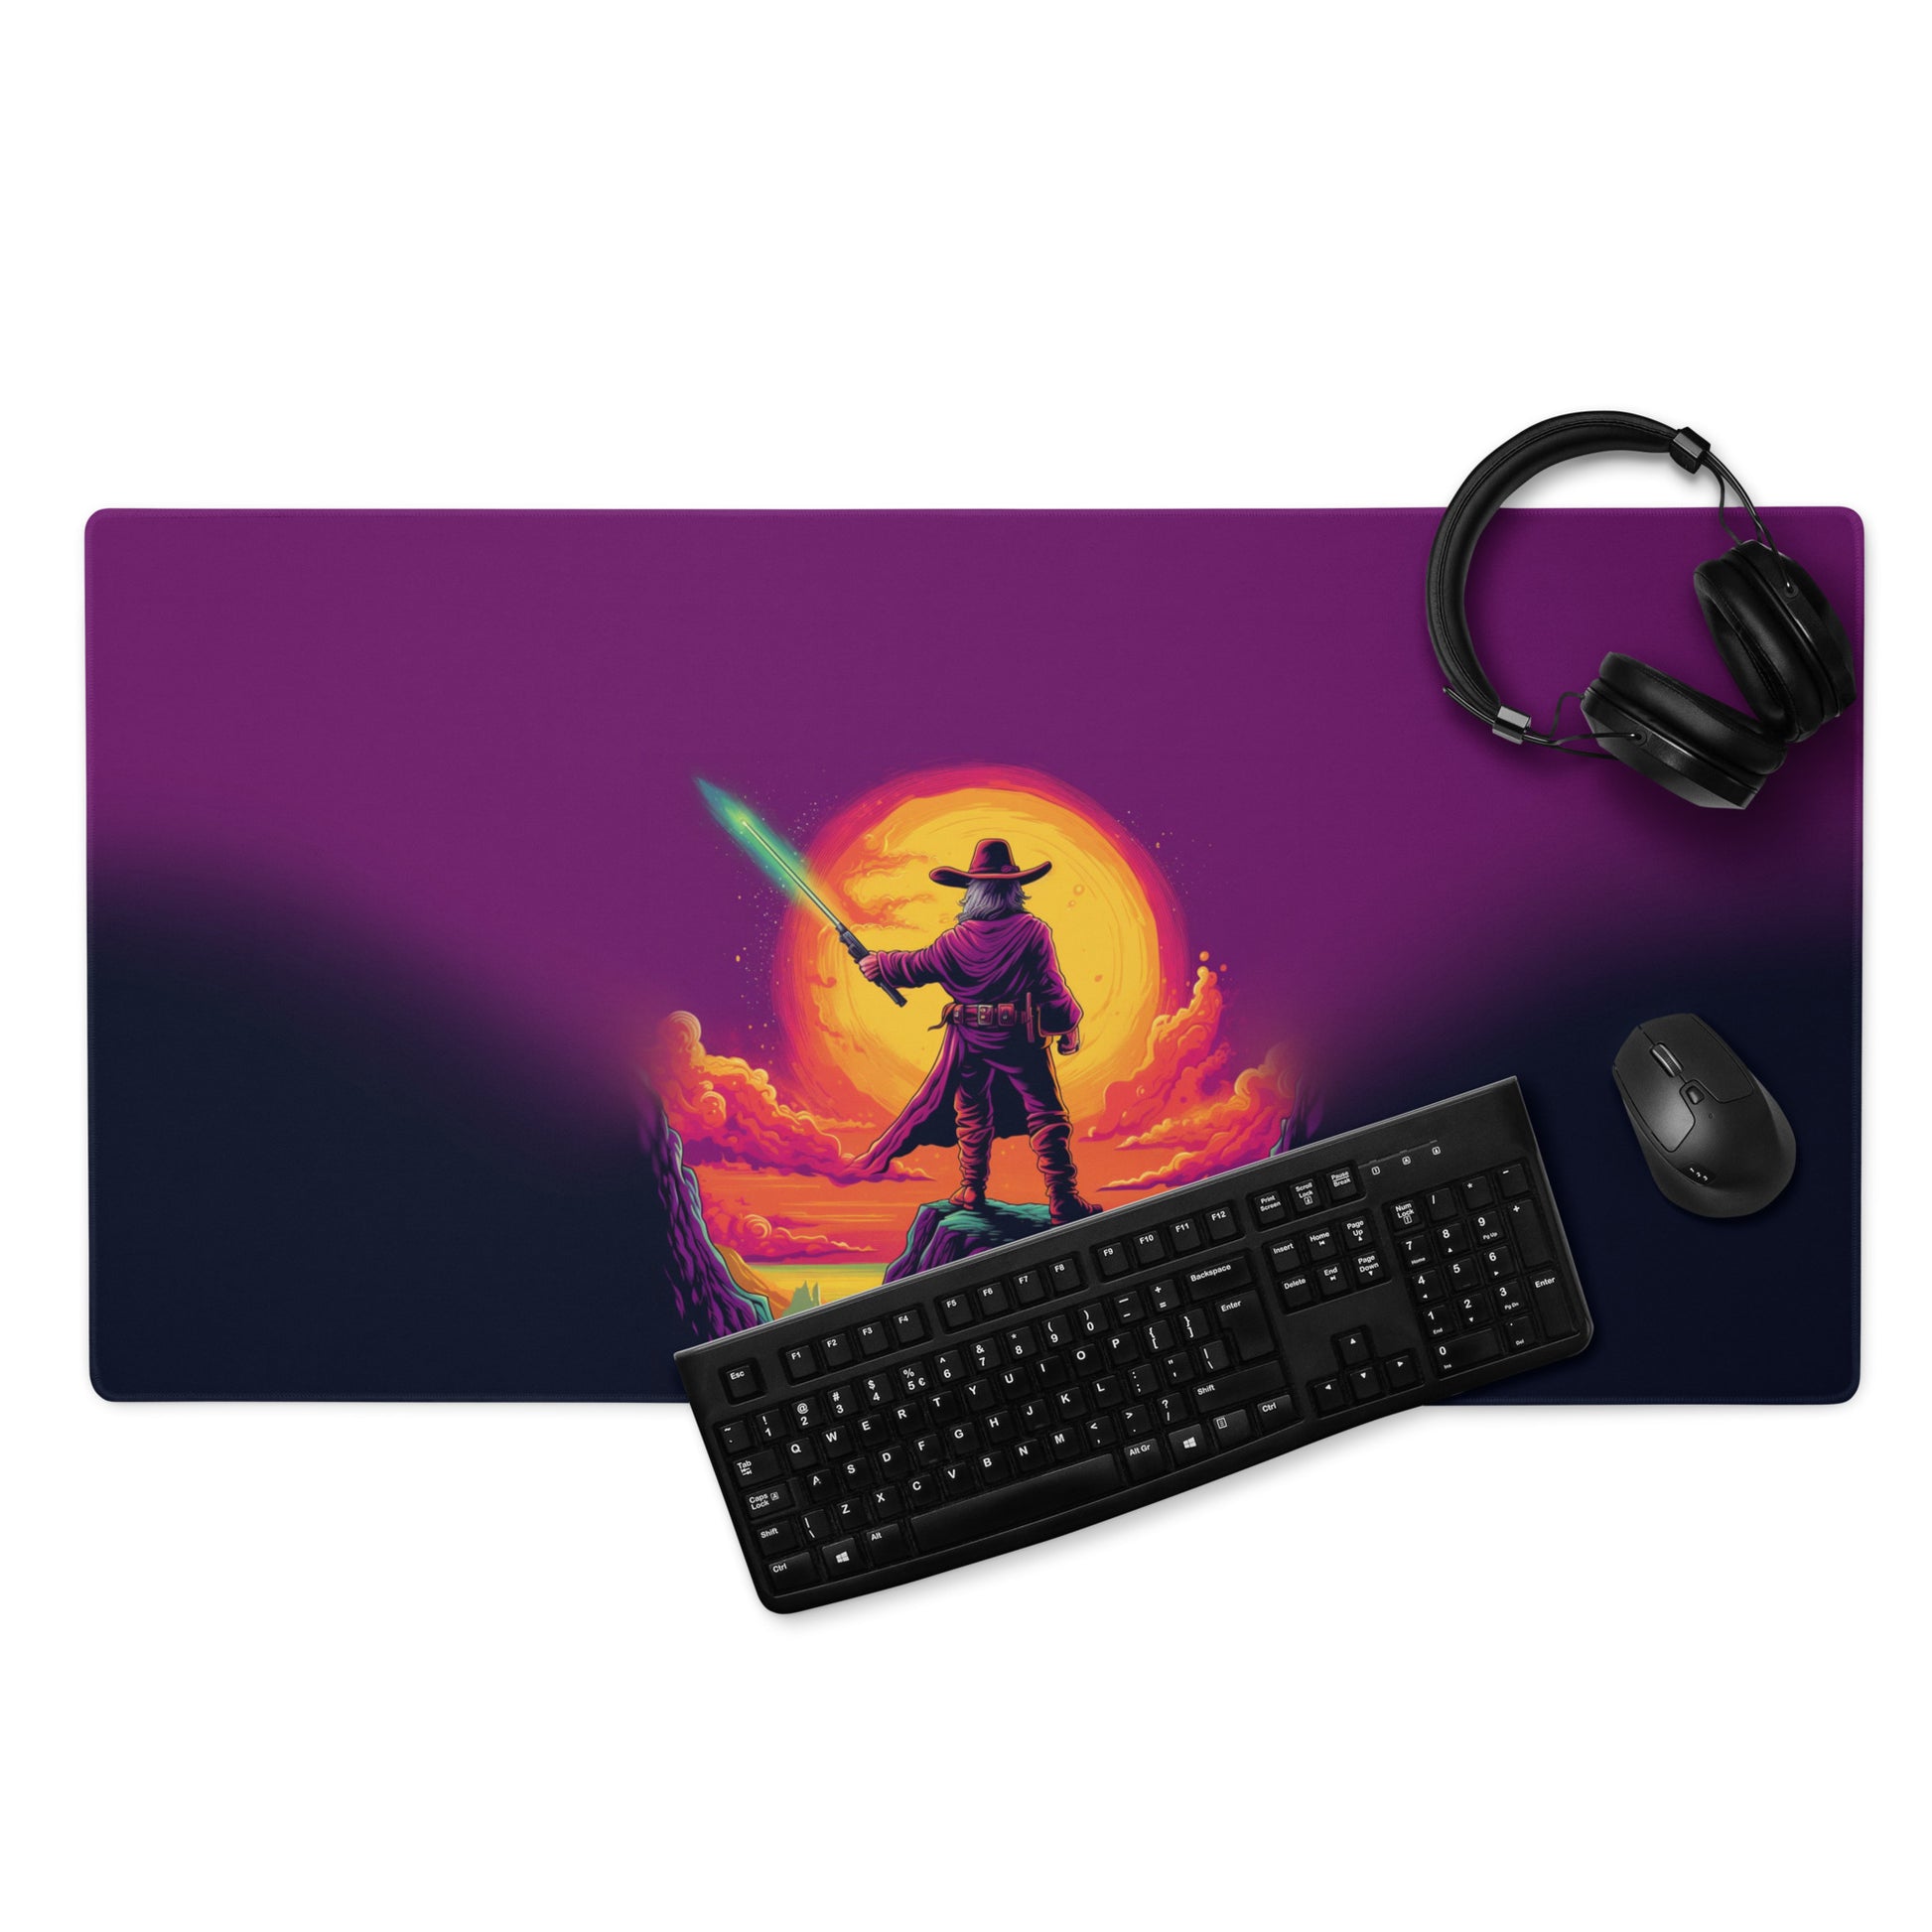 A 36" x 18" desk pad with a cowboy holding a glowing sword looking at the sunset. With a keyboard, mouse, and headphones sitting on it.